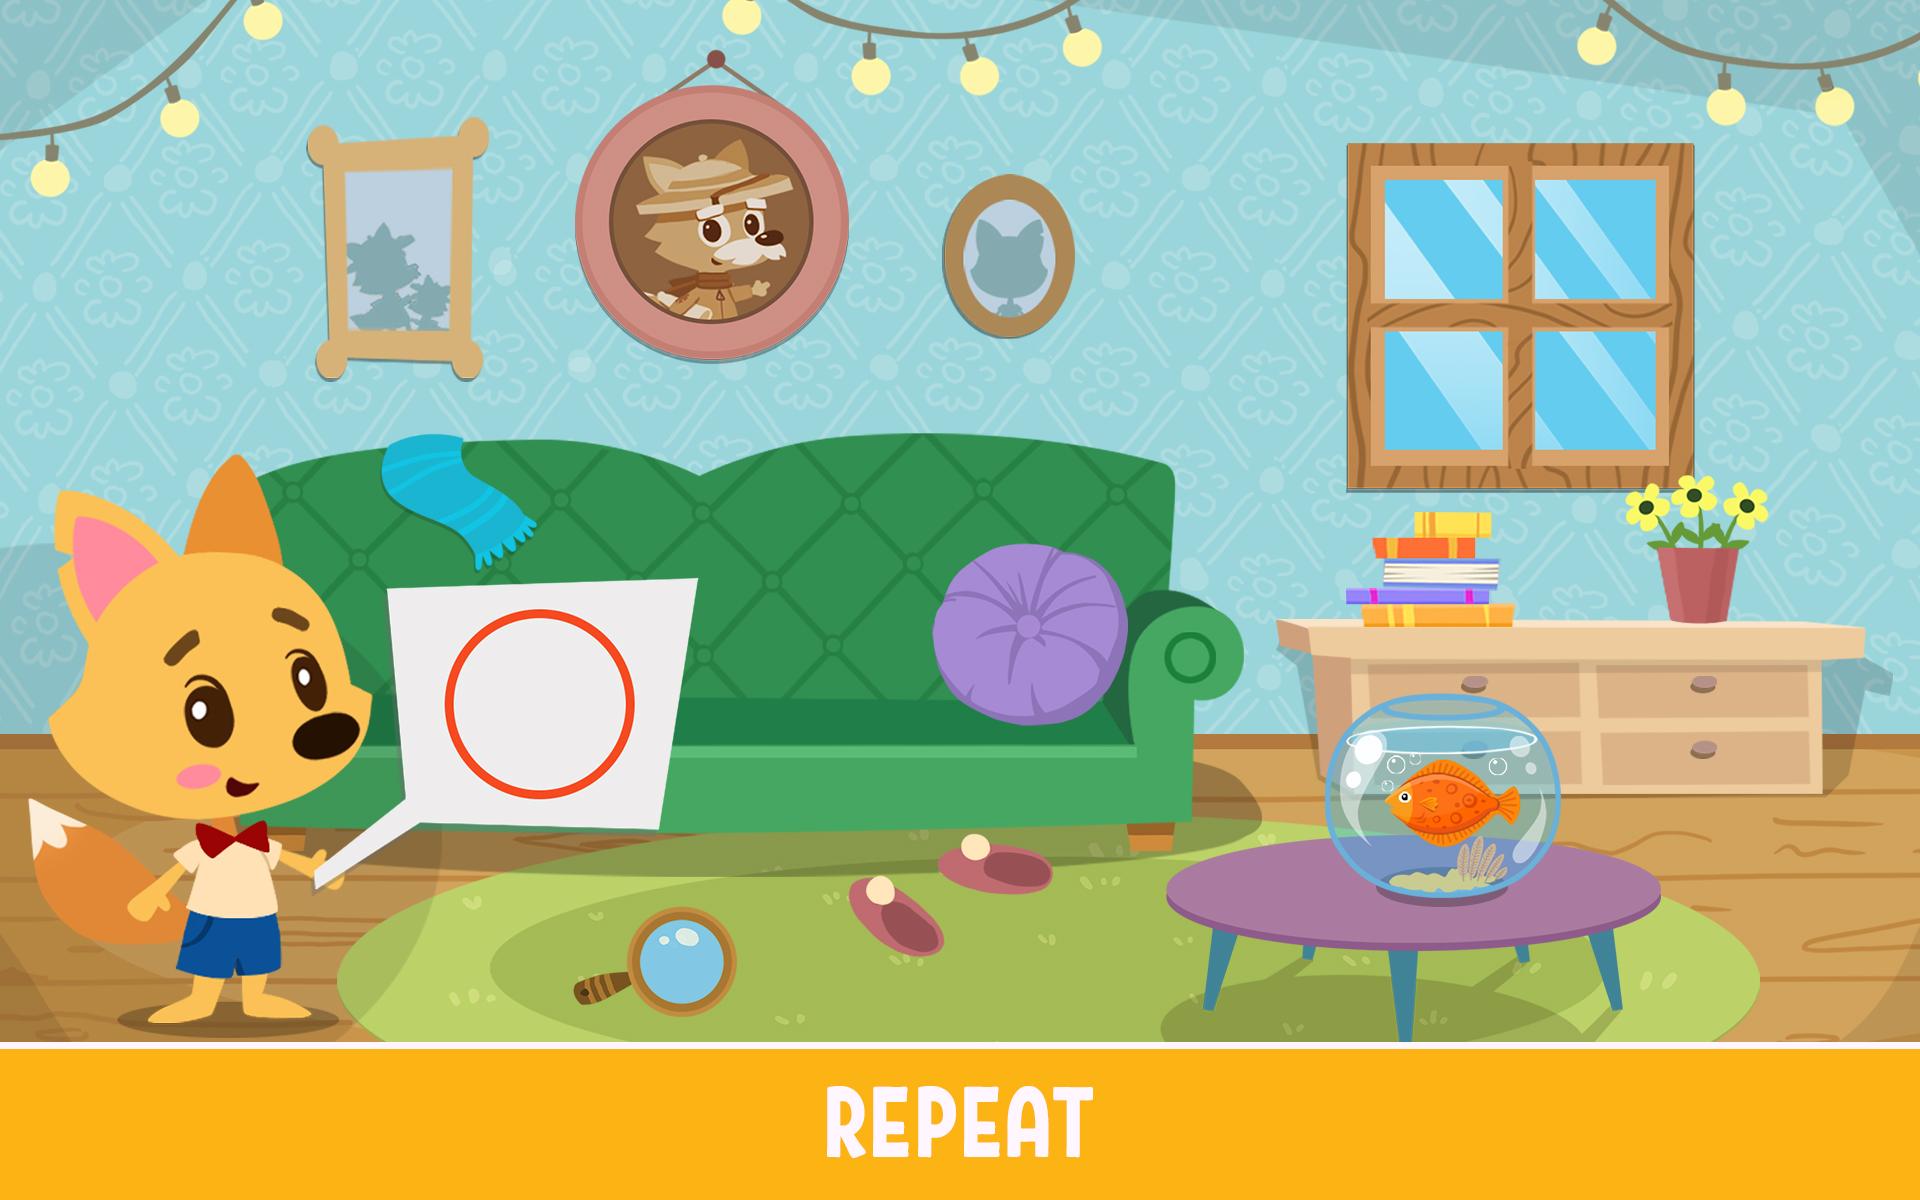 Kids Academy - learning games for toddlers 3.1.3 Screenshot 17